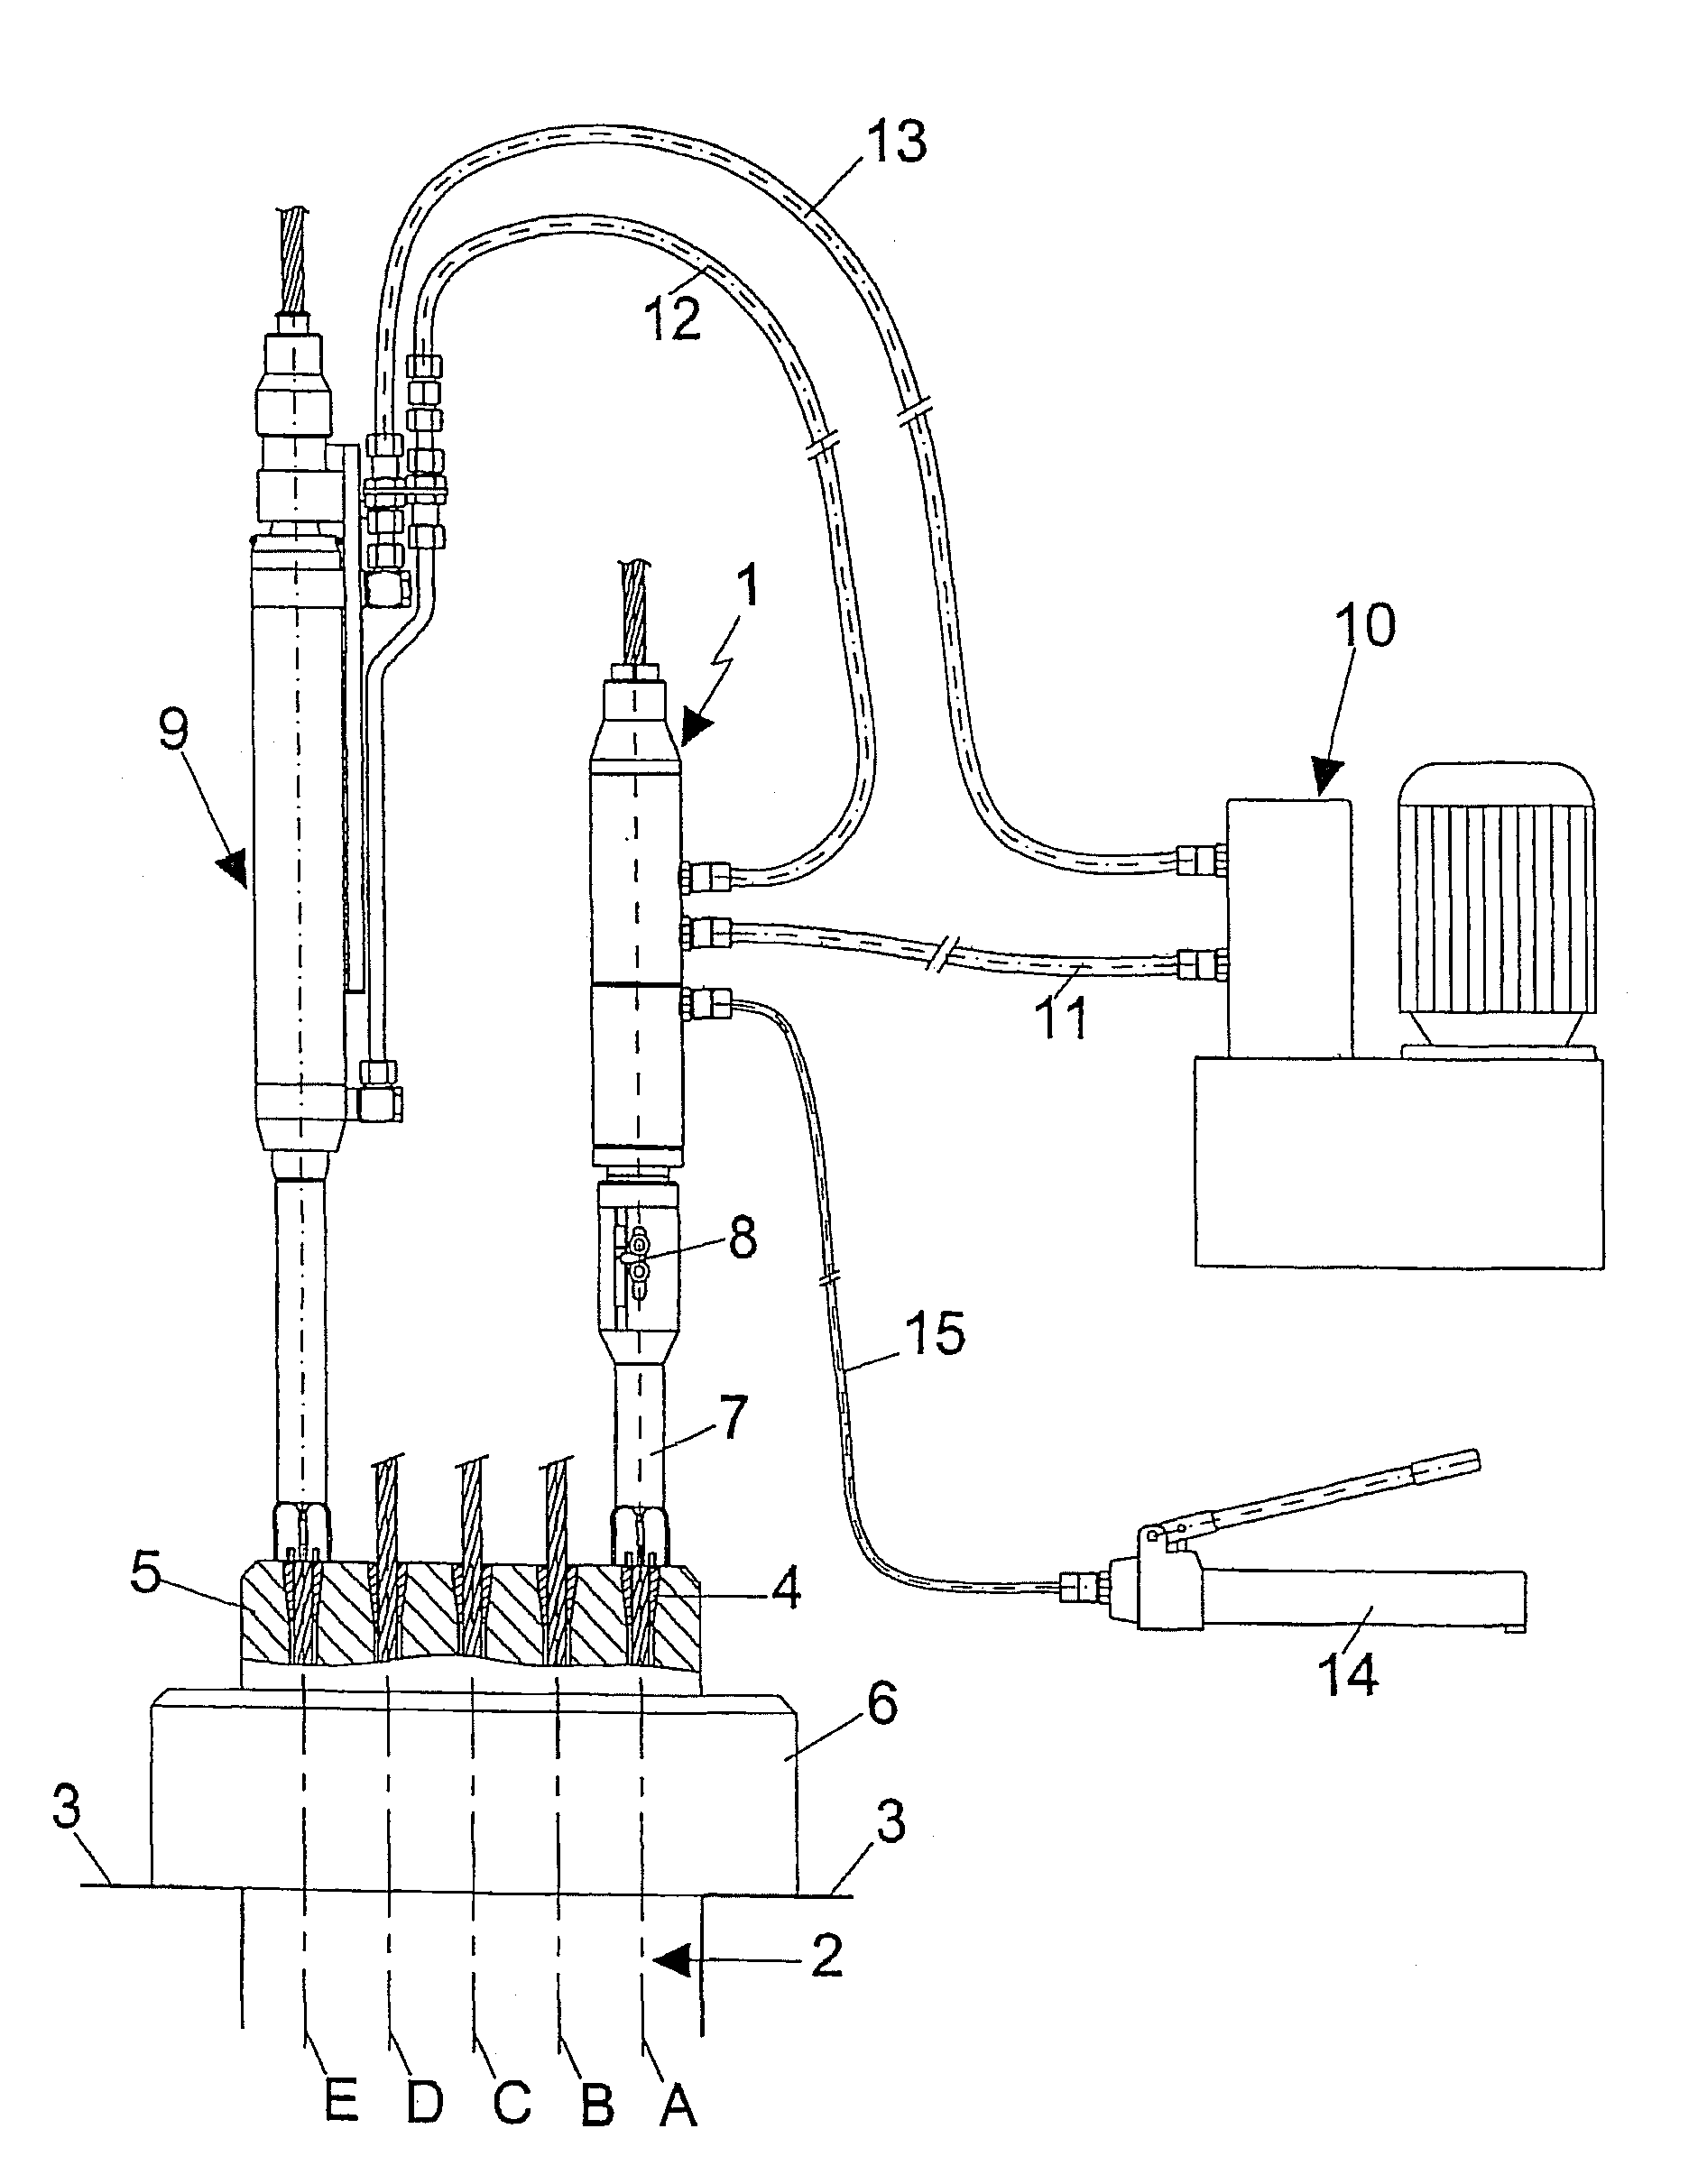 Device and method for controlling a prestressing jack when tensioning a tendon